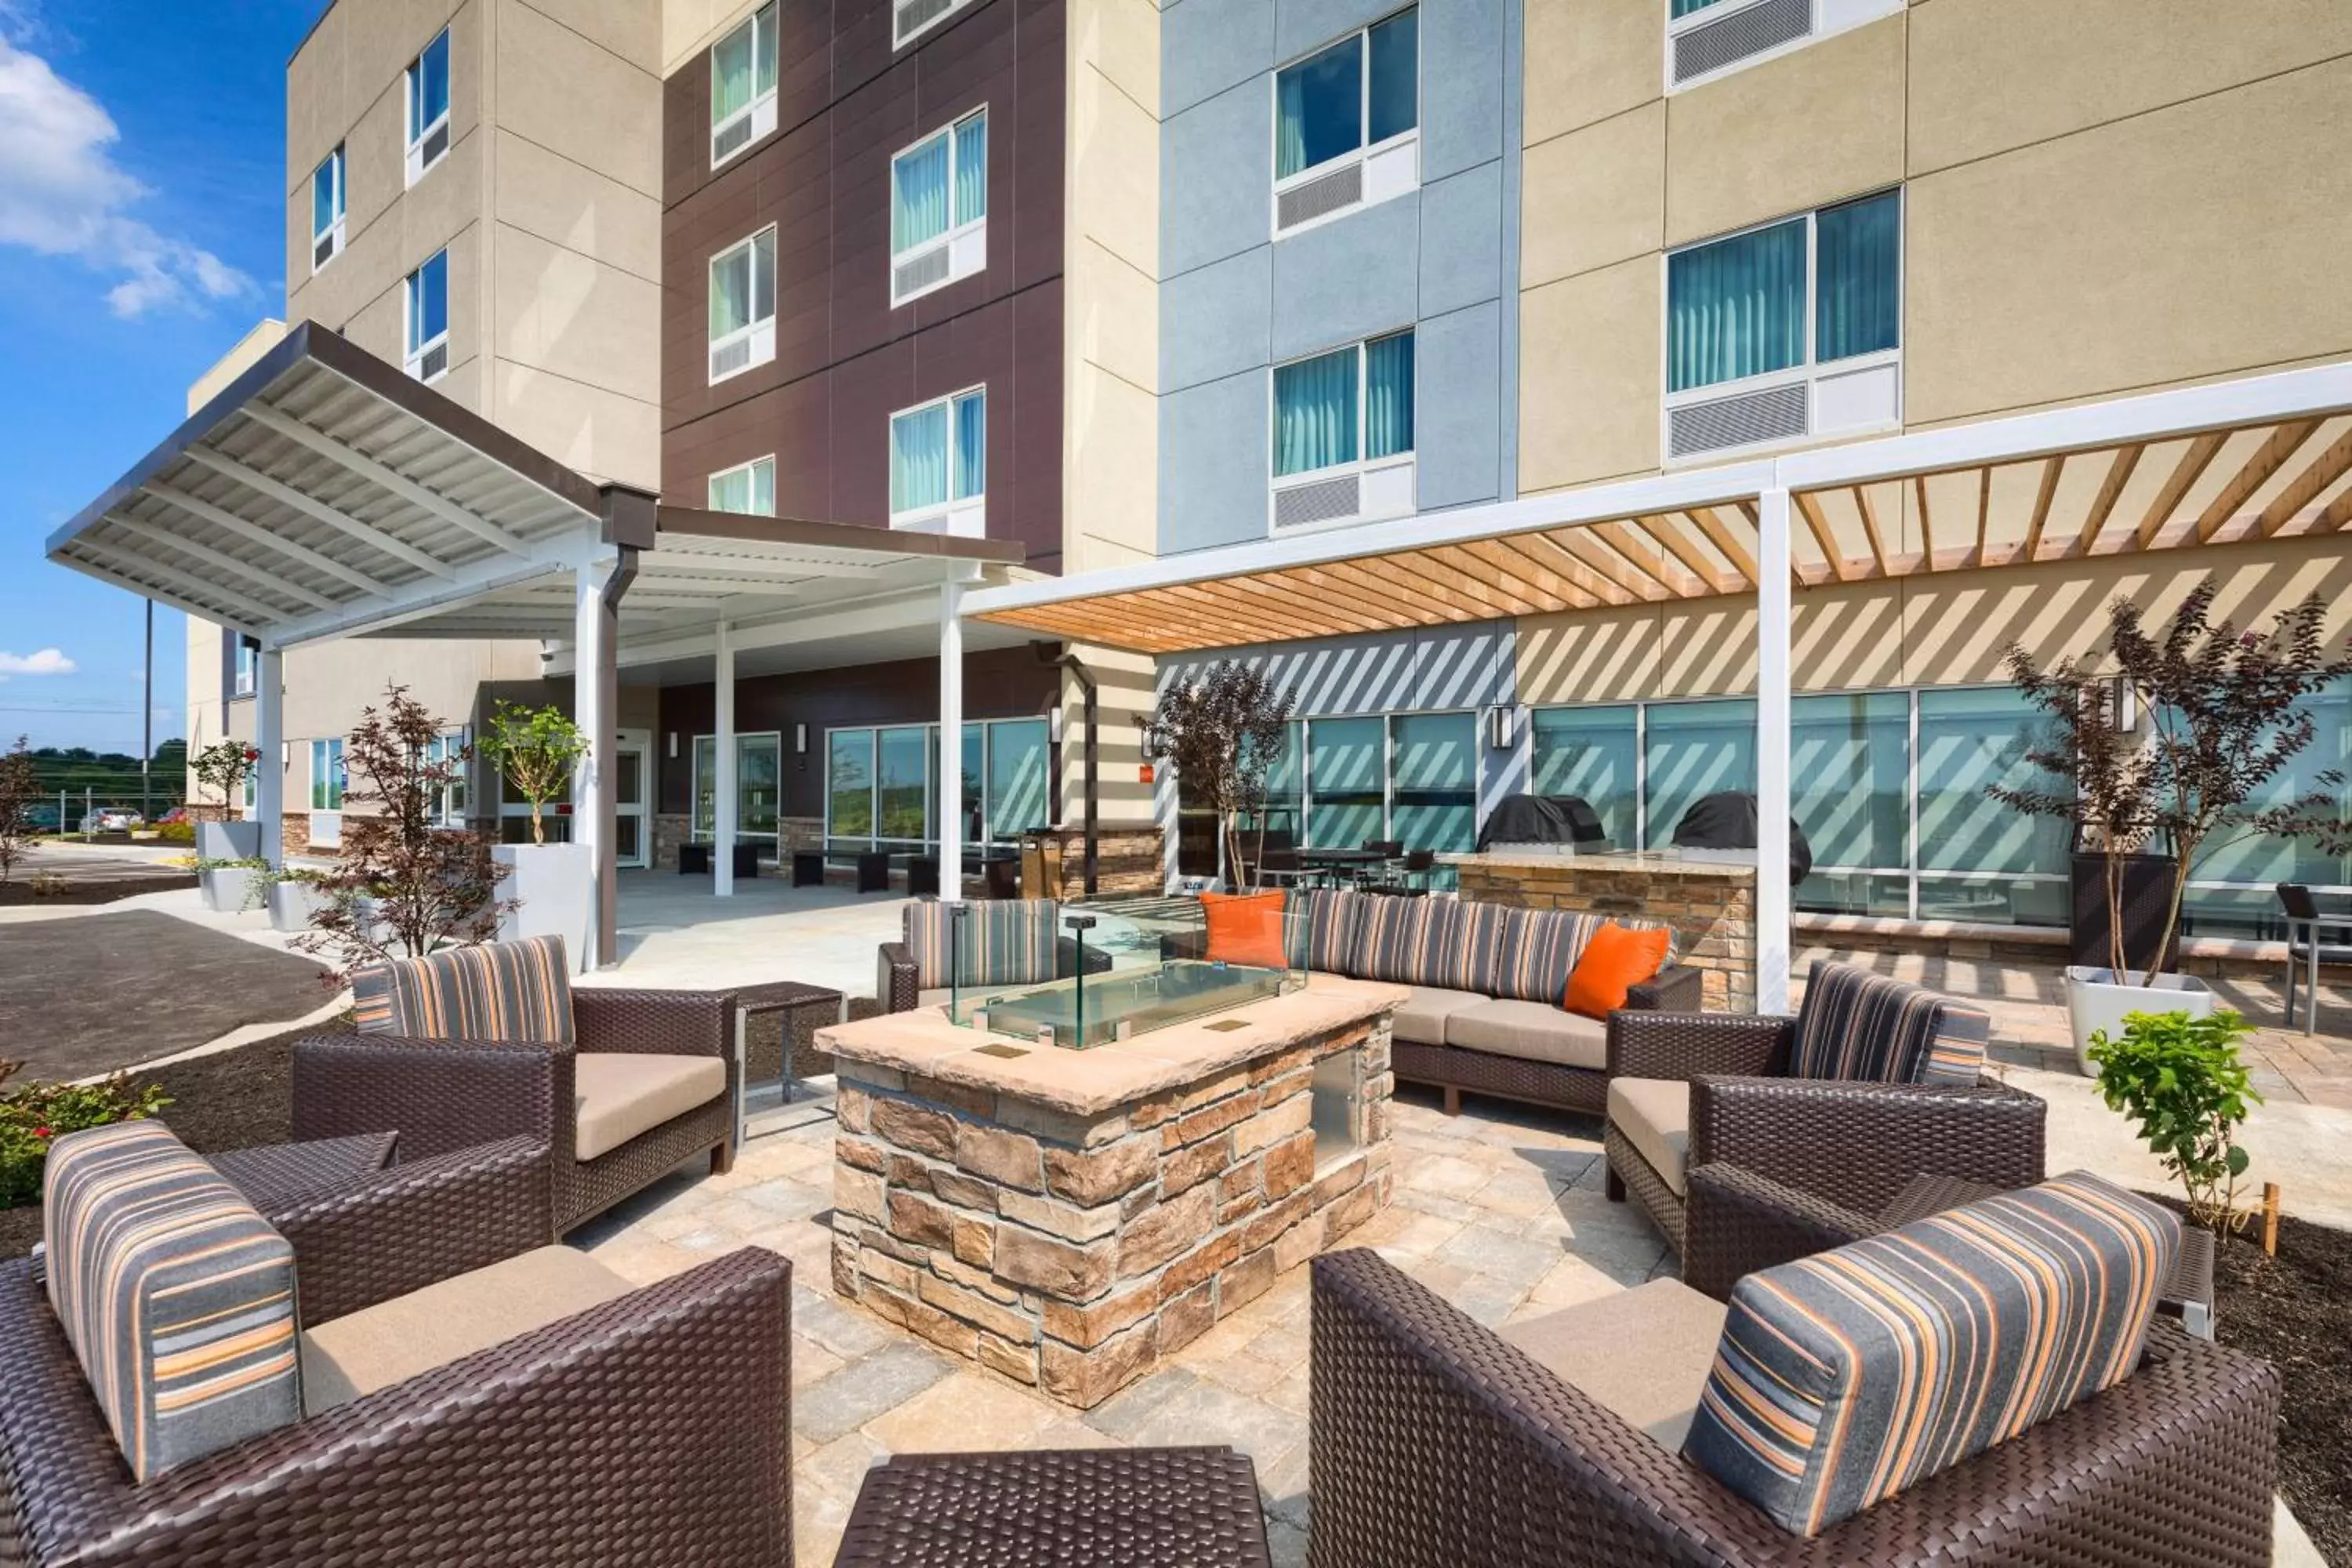 Property building in TownePlace Suites by Marriott Owensboro